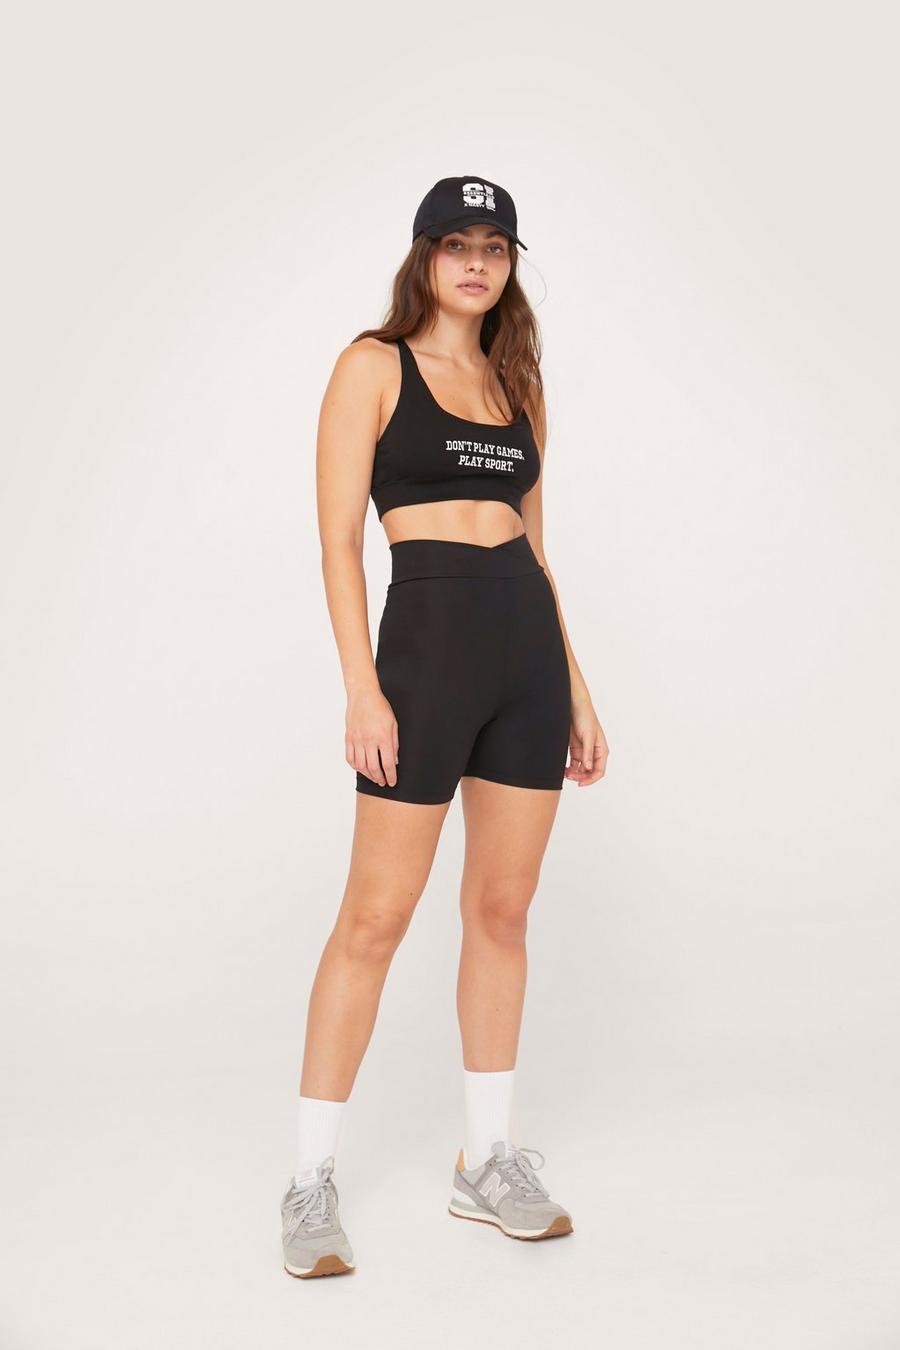 Sports Illustrated Cross Over Cycling Shorts